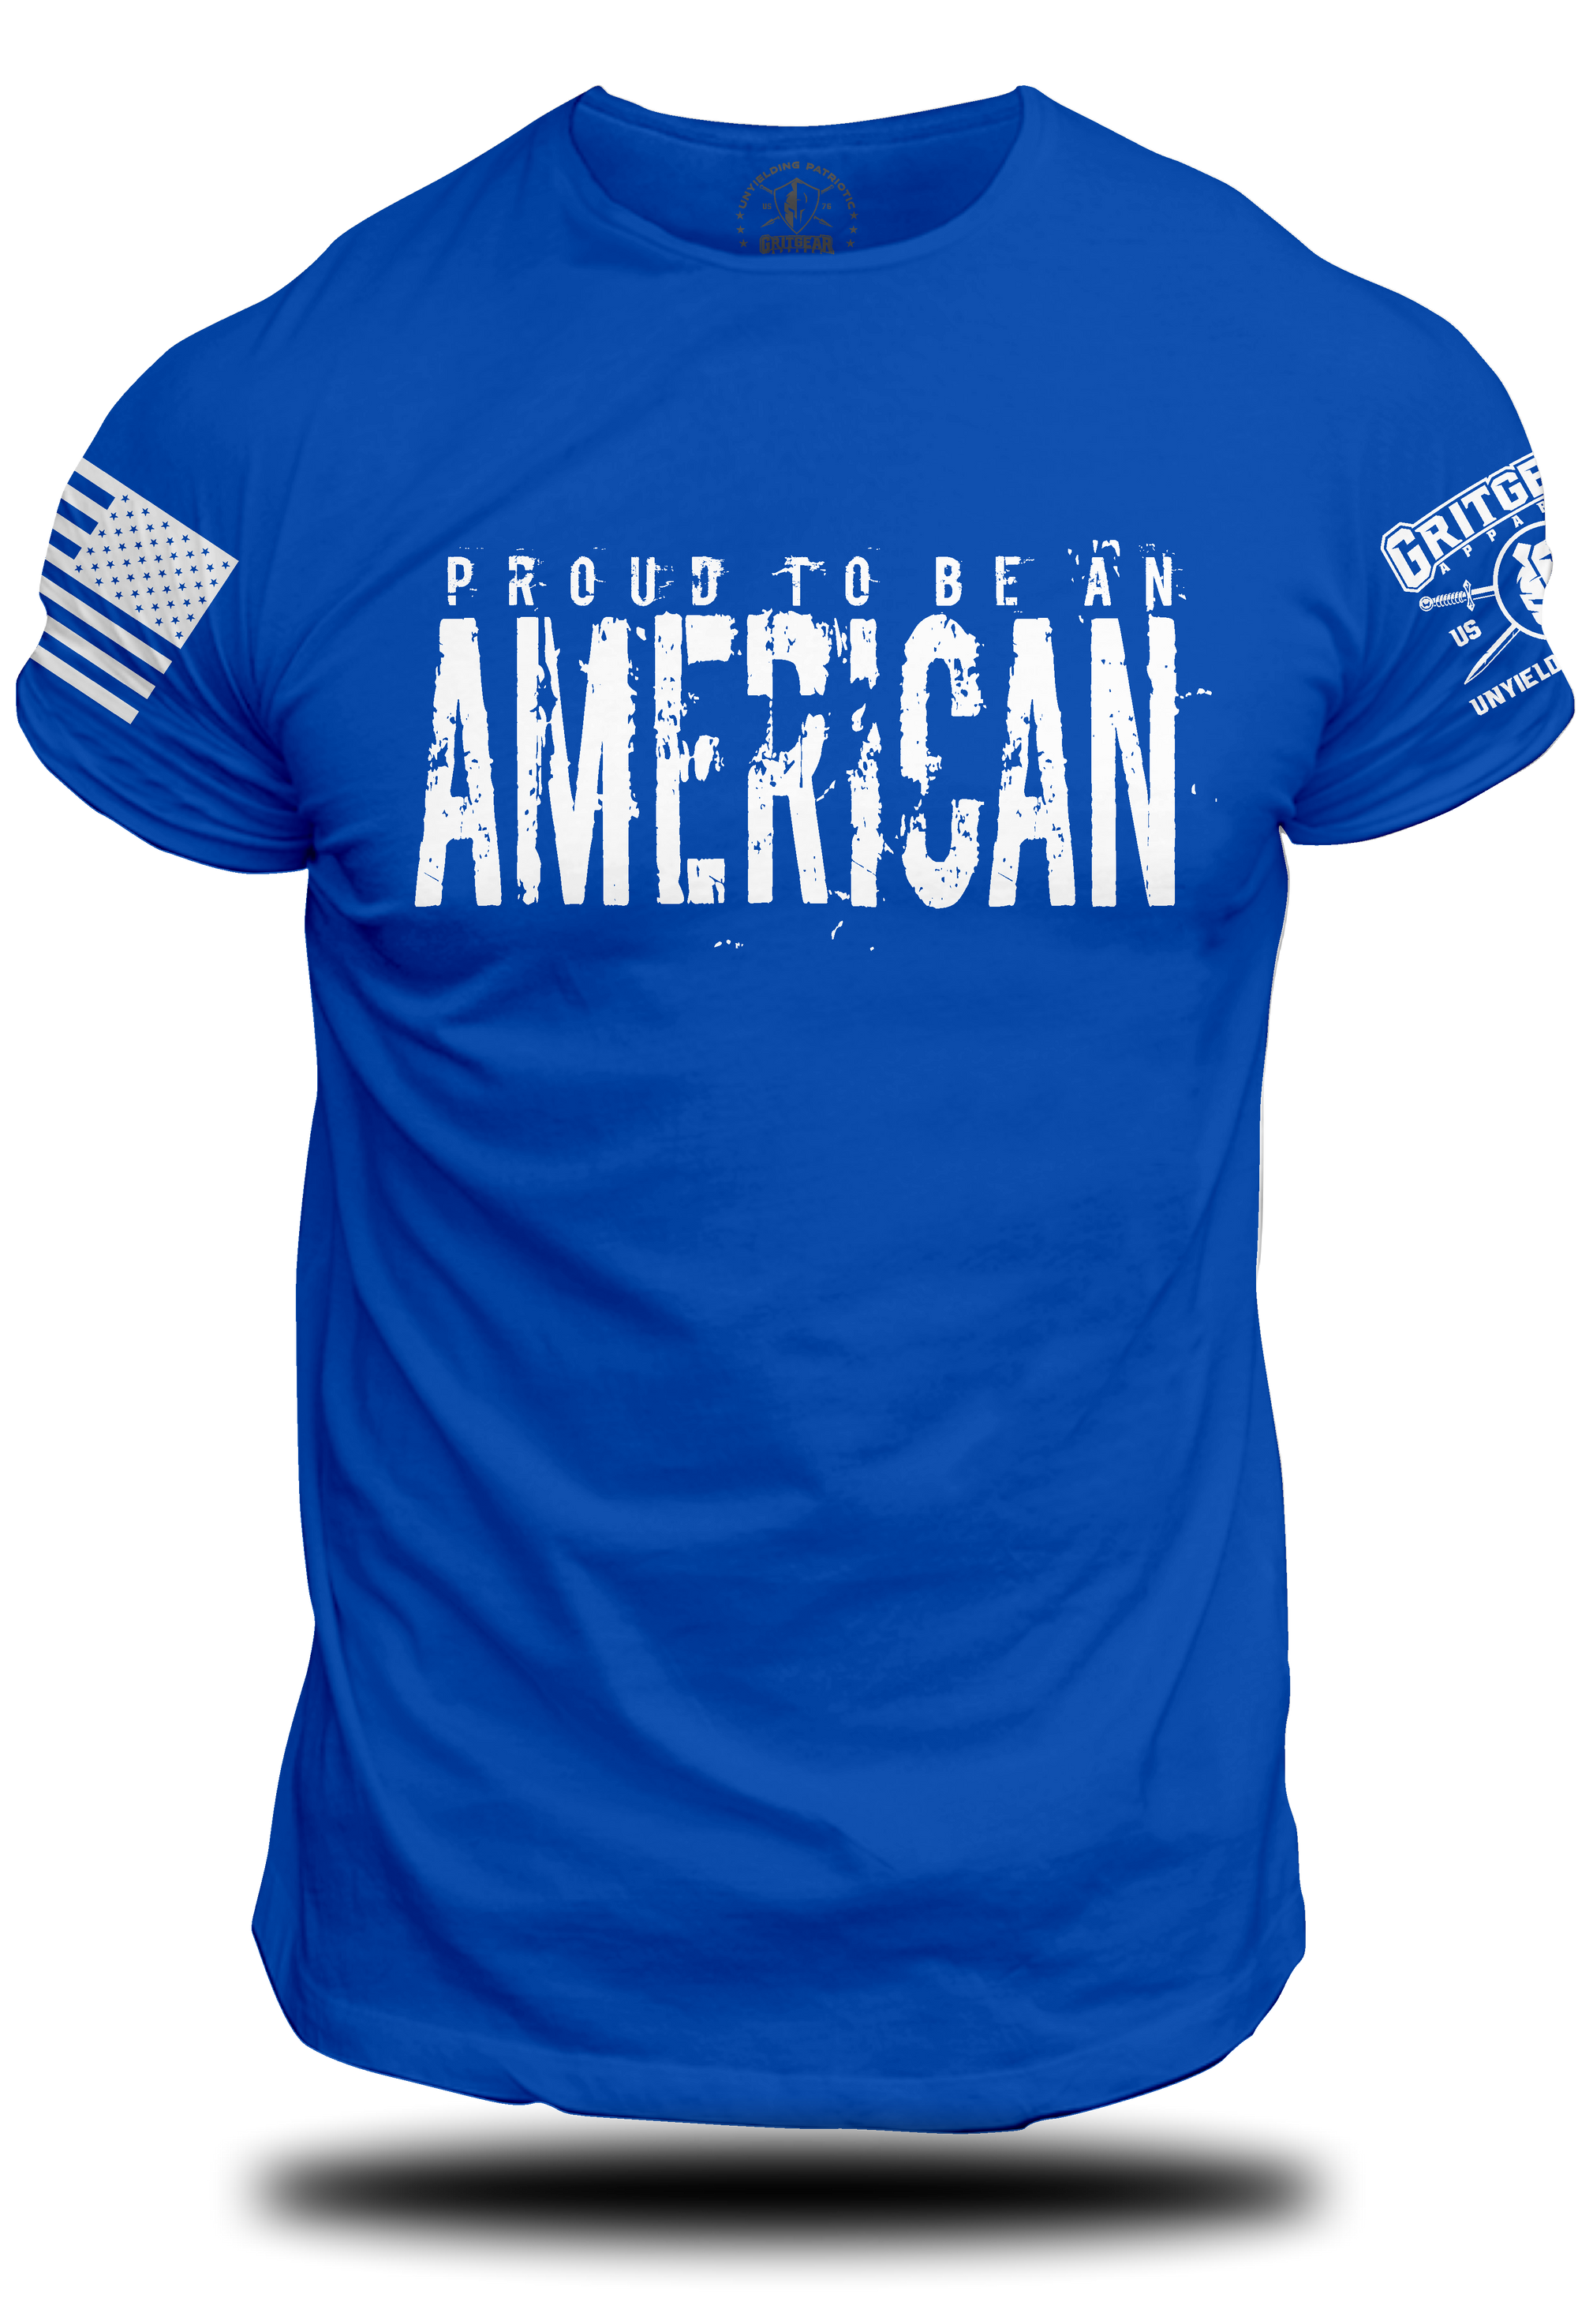 Proud to be an AMERICAN T-shirt | Grit Gear Apparel ®